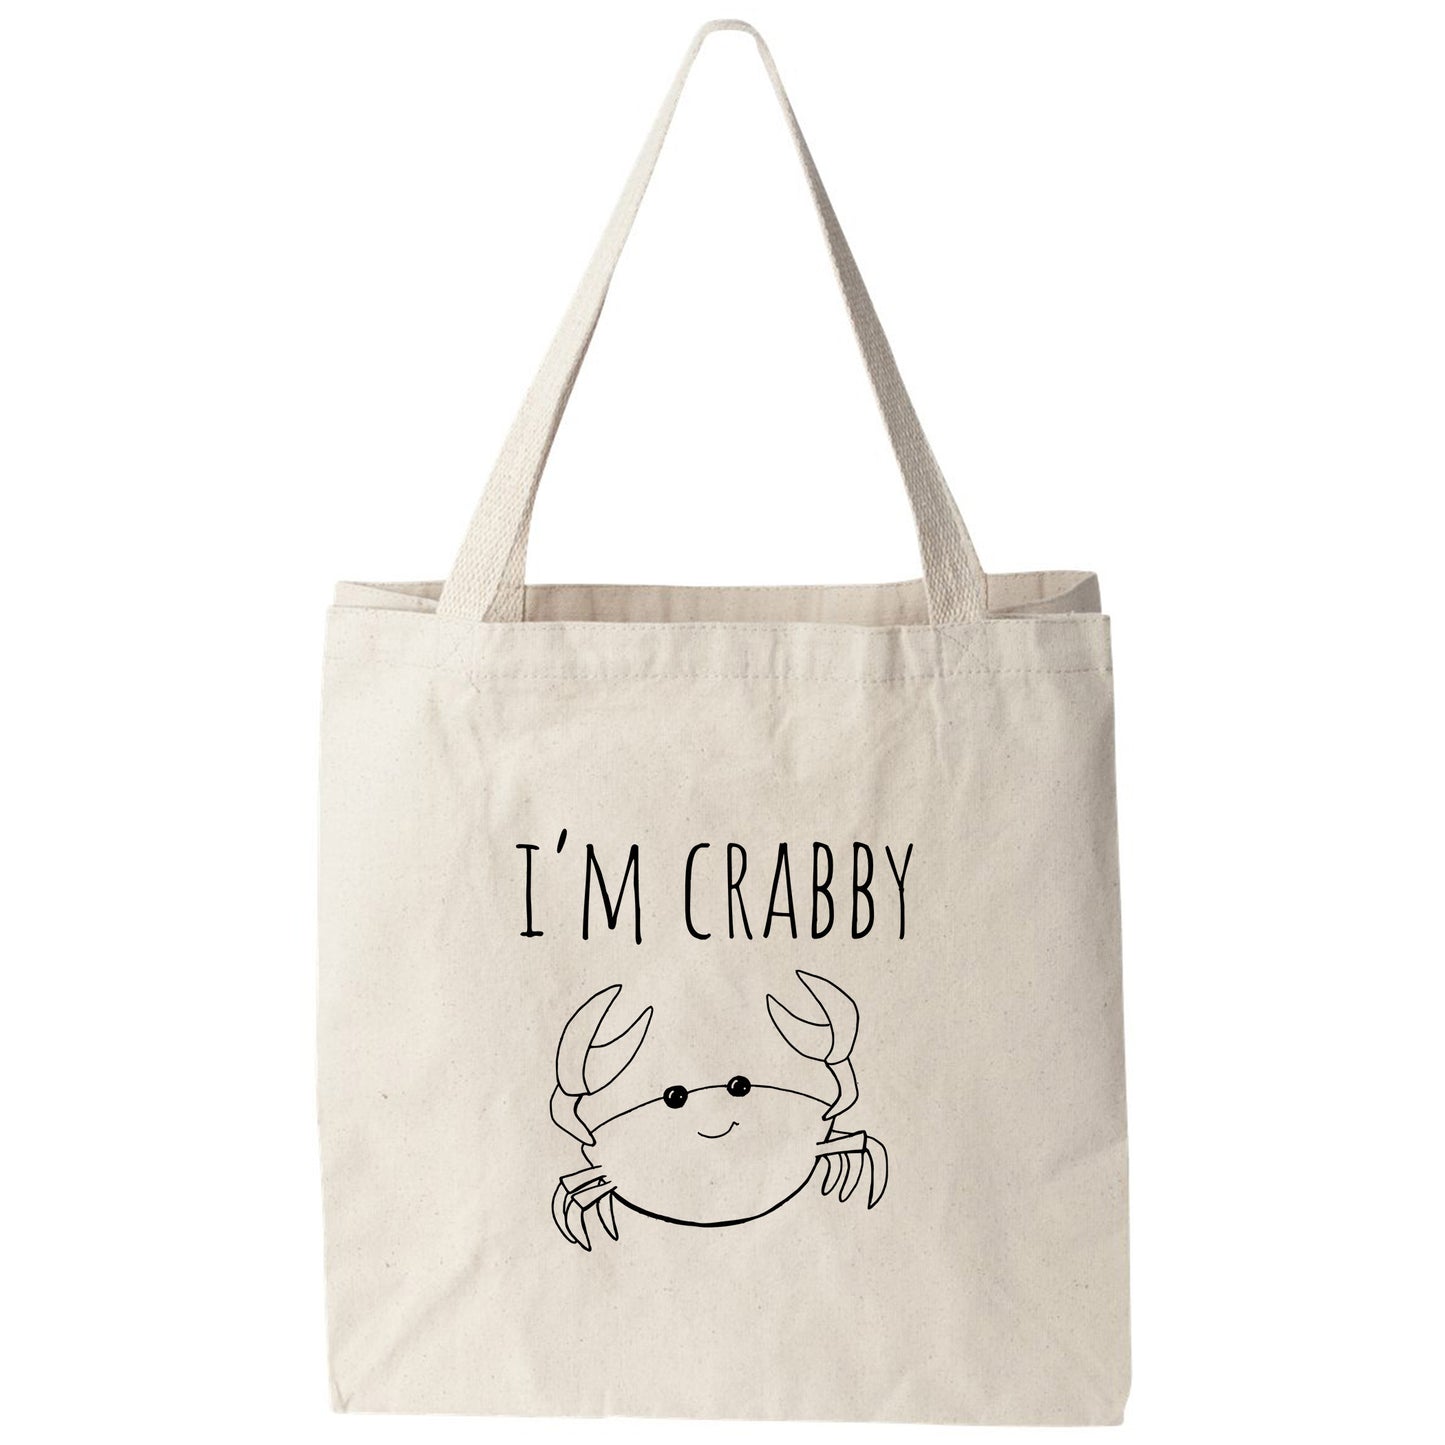 a tote bag that says i'm crabby